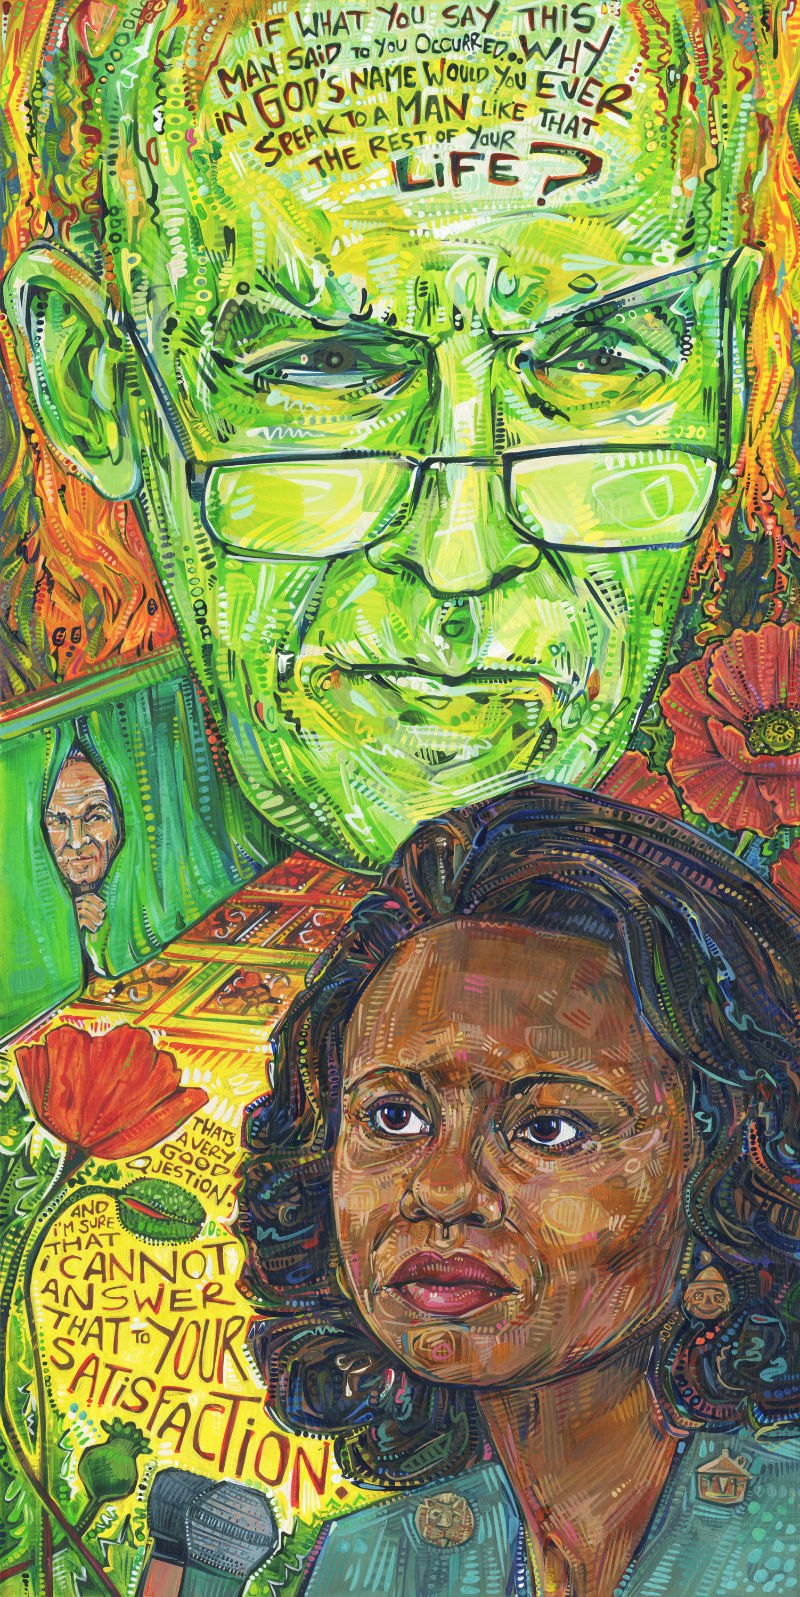 Anita Hill as Dorothy from the Wizard of Oz confronting Senator Alan Simpson painting from 2017